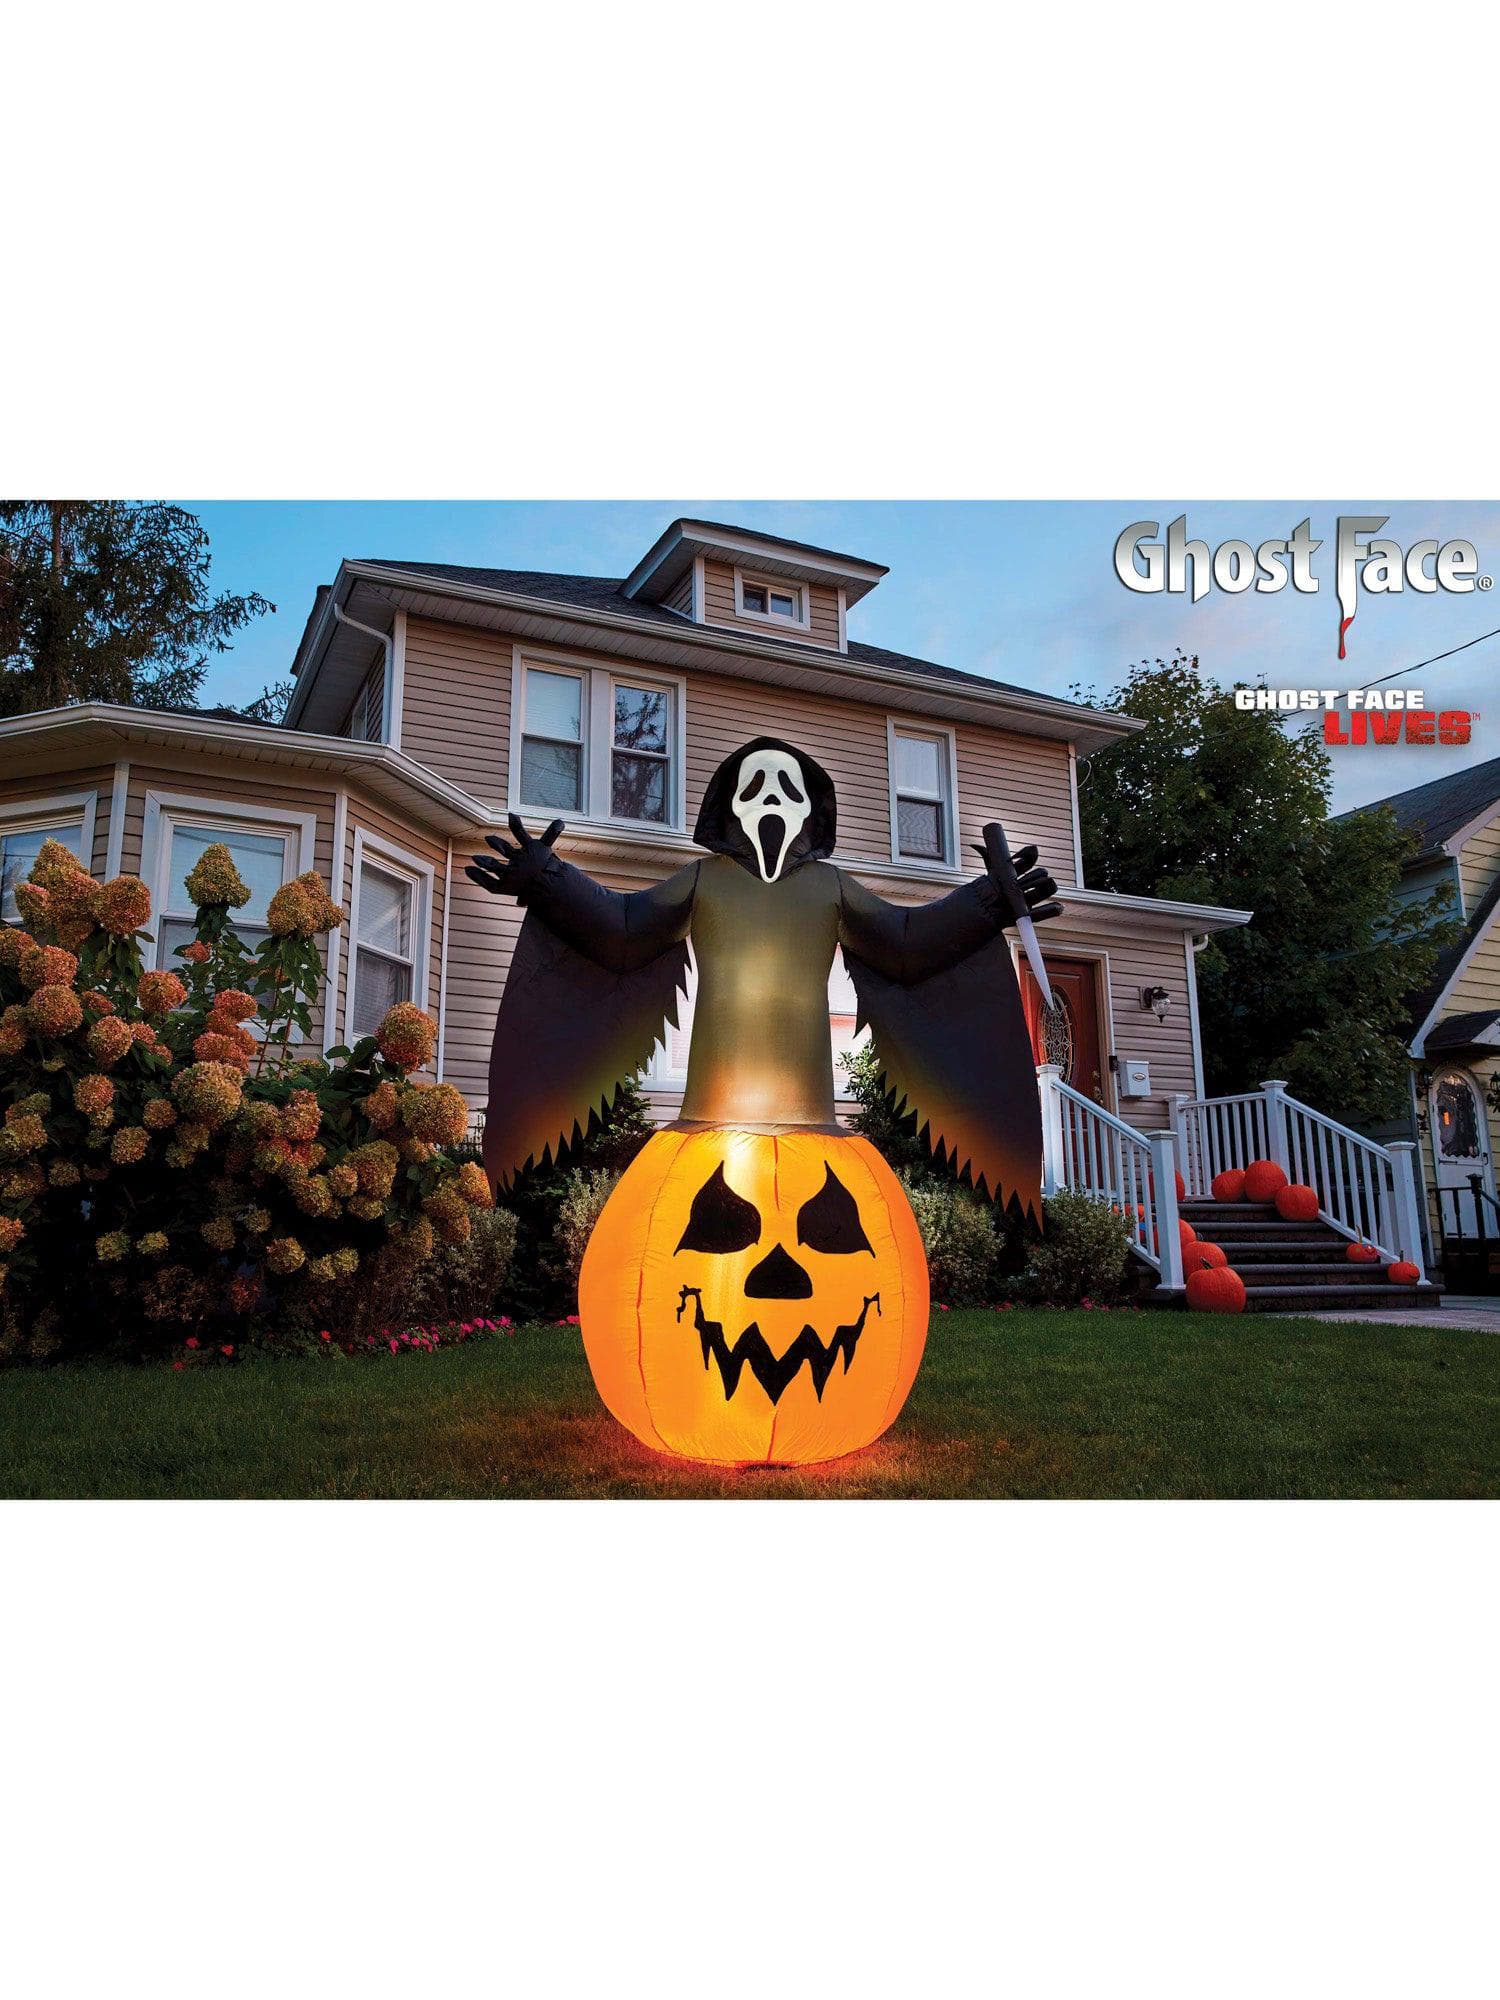 6 Foot Scream Ghost Face Light Up Halloween Inflatable Lawn Decor - costumes.com